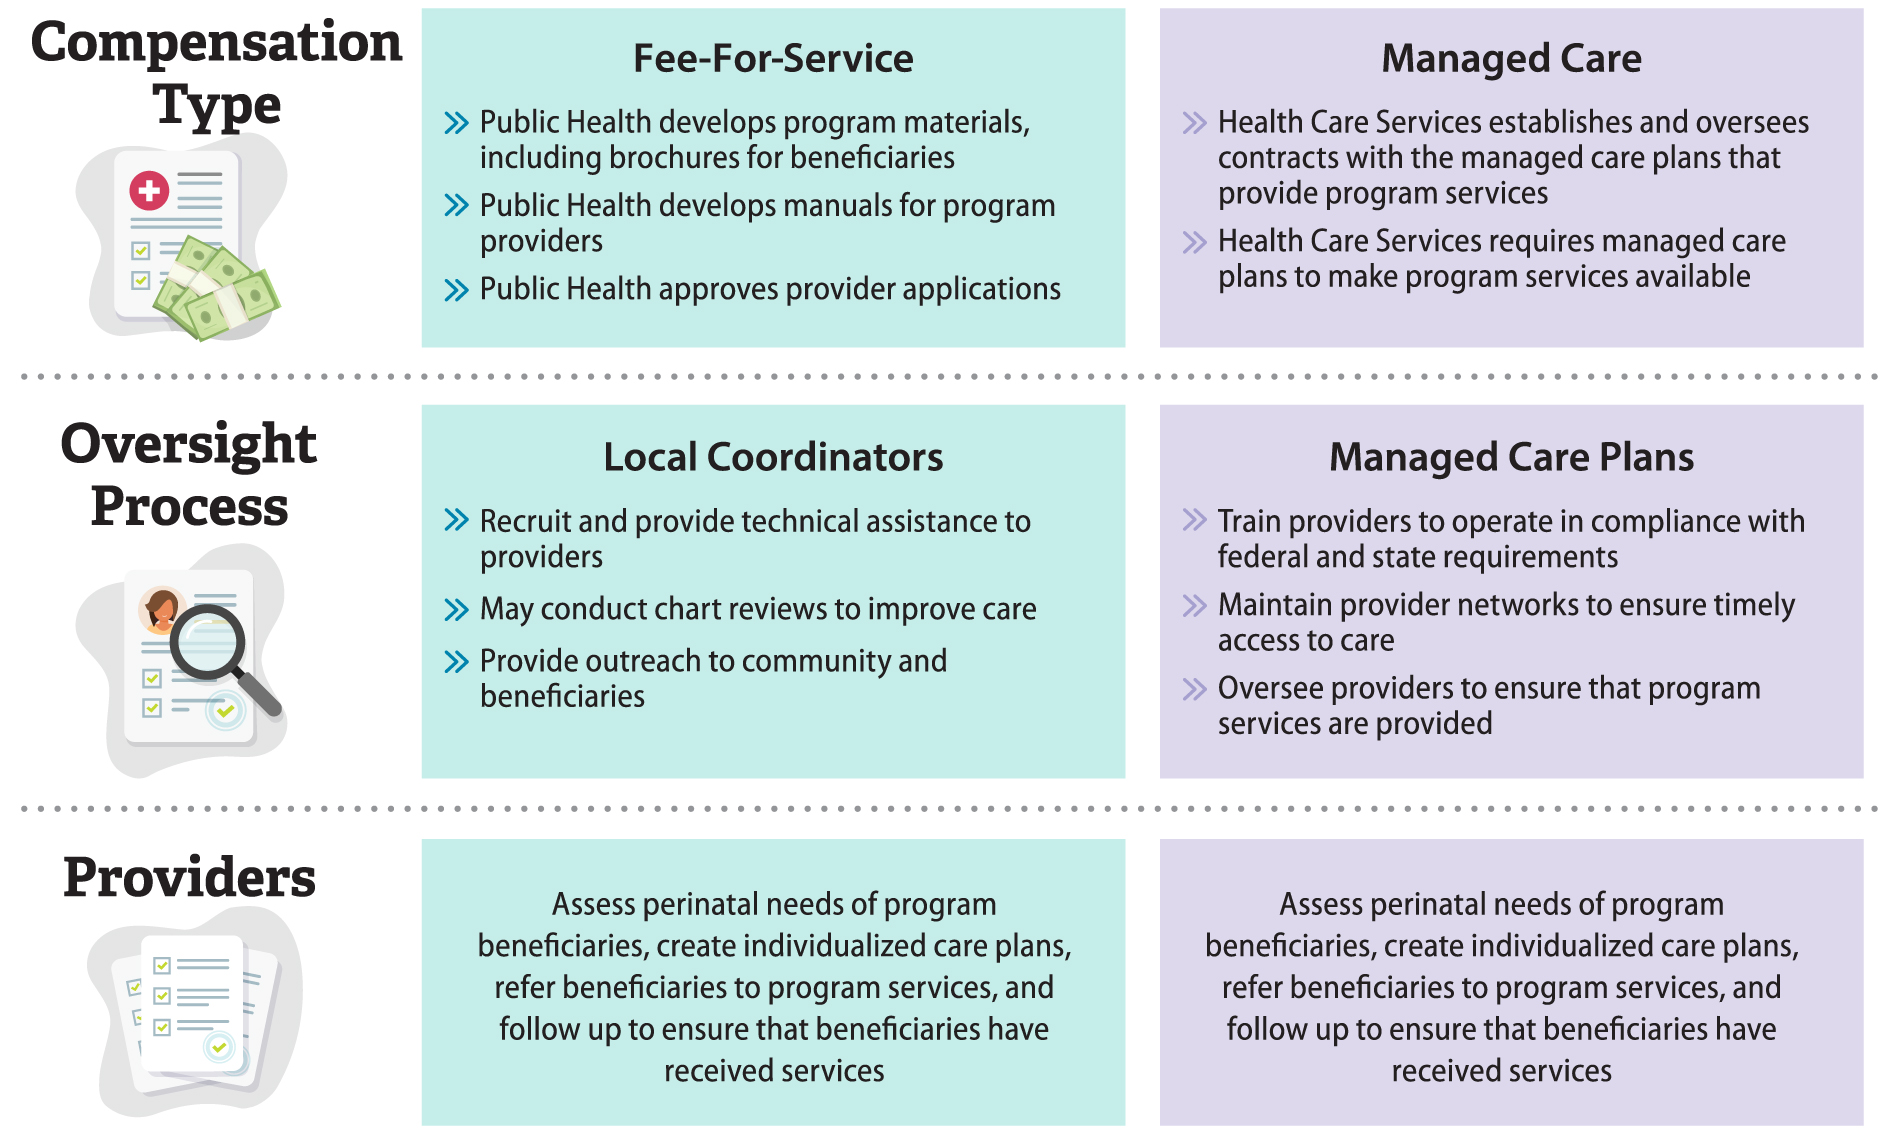 A chart comparing Public Health’s and Health Care Services’ billing type, oversight process, and provider roles within the perinatal program